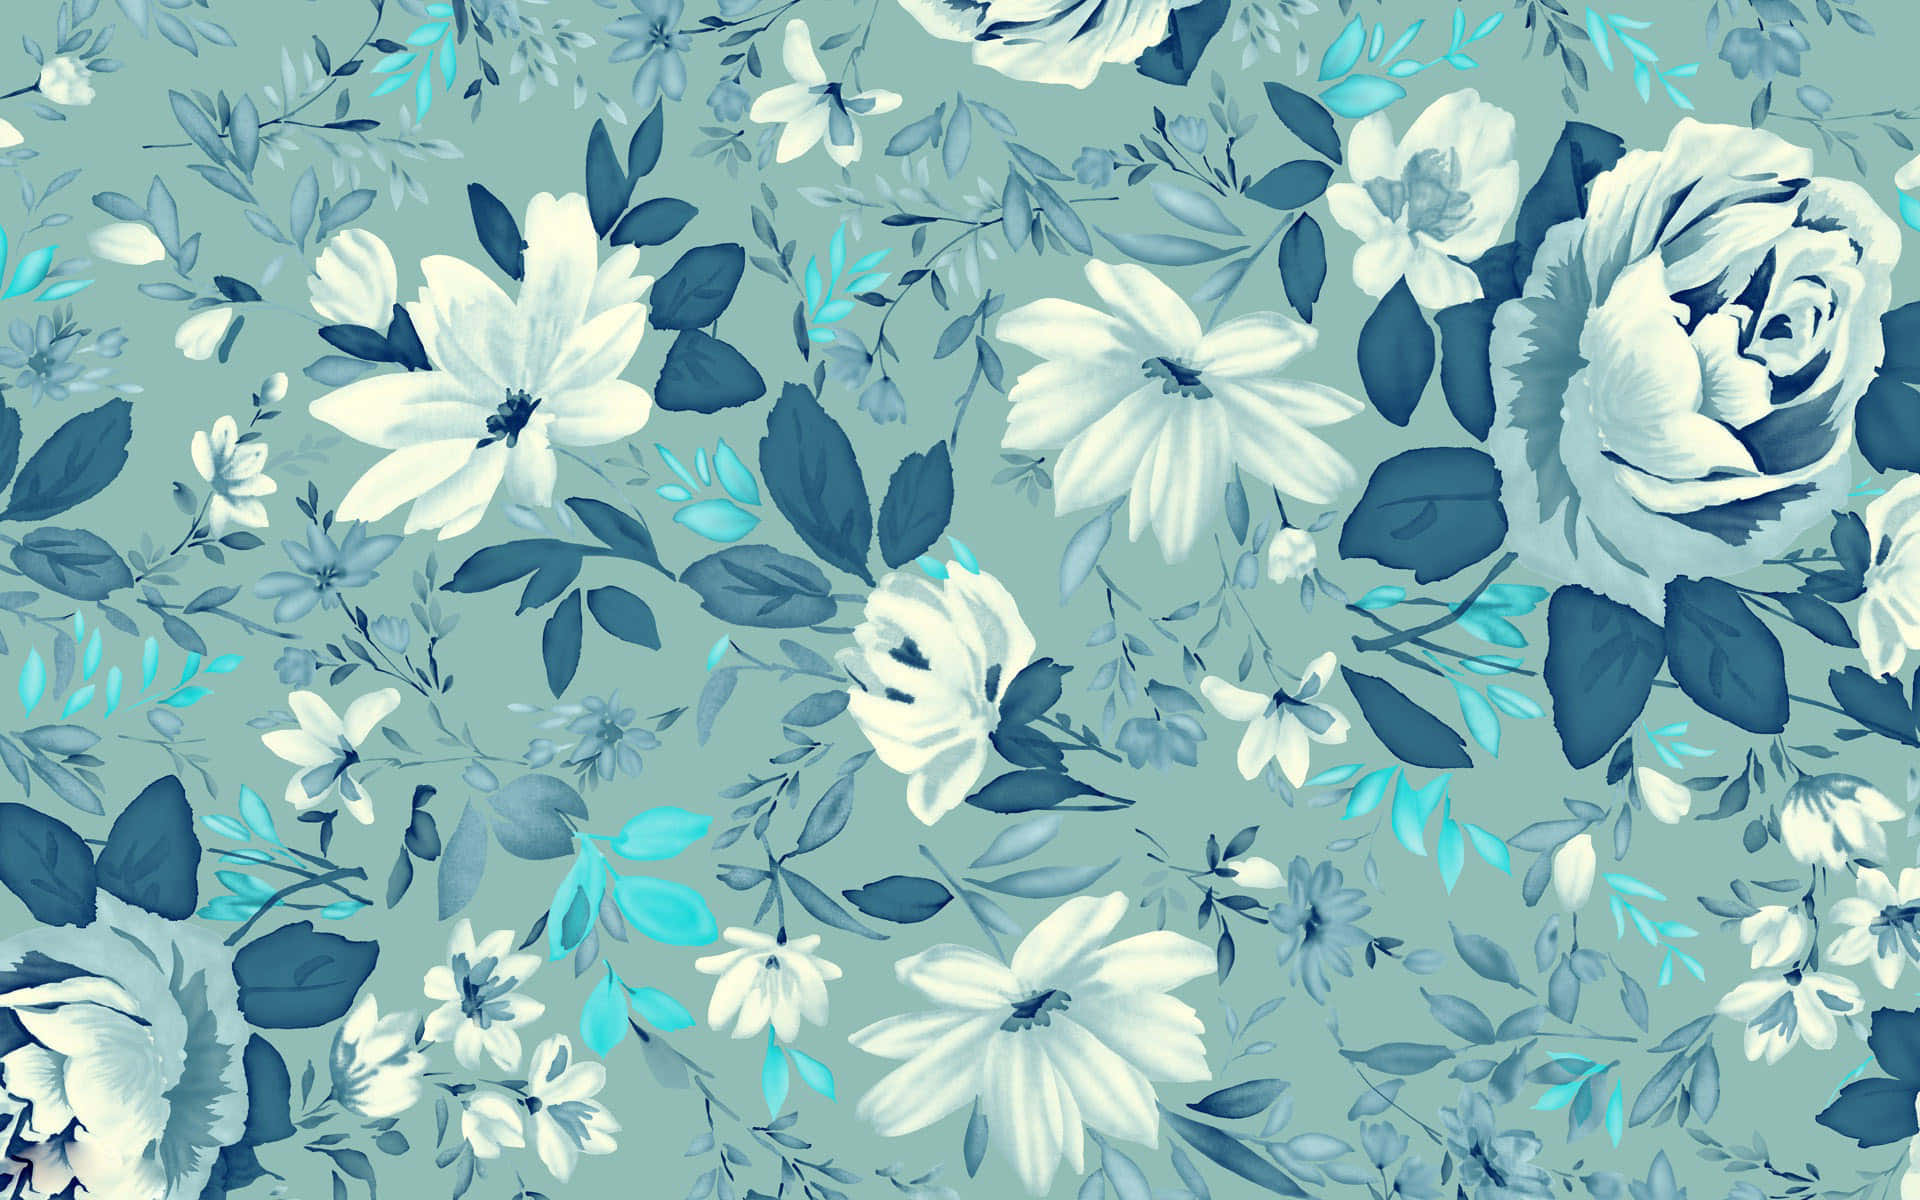 A vibrant and beautiful floral pattern